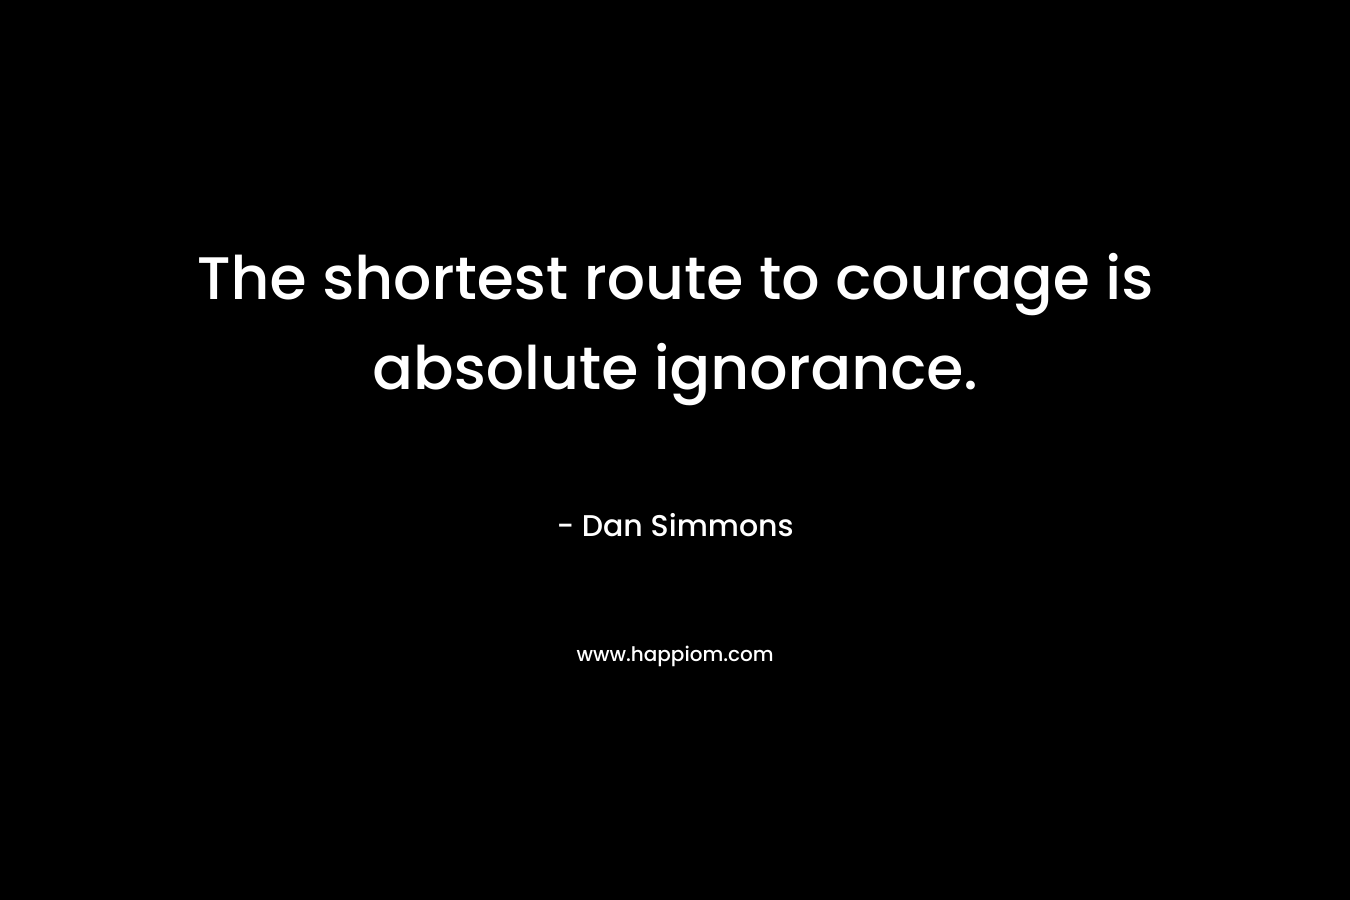 The shortest route to courage is absolute ignorance.